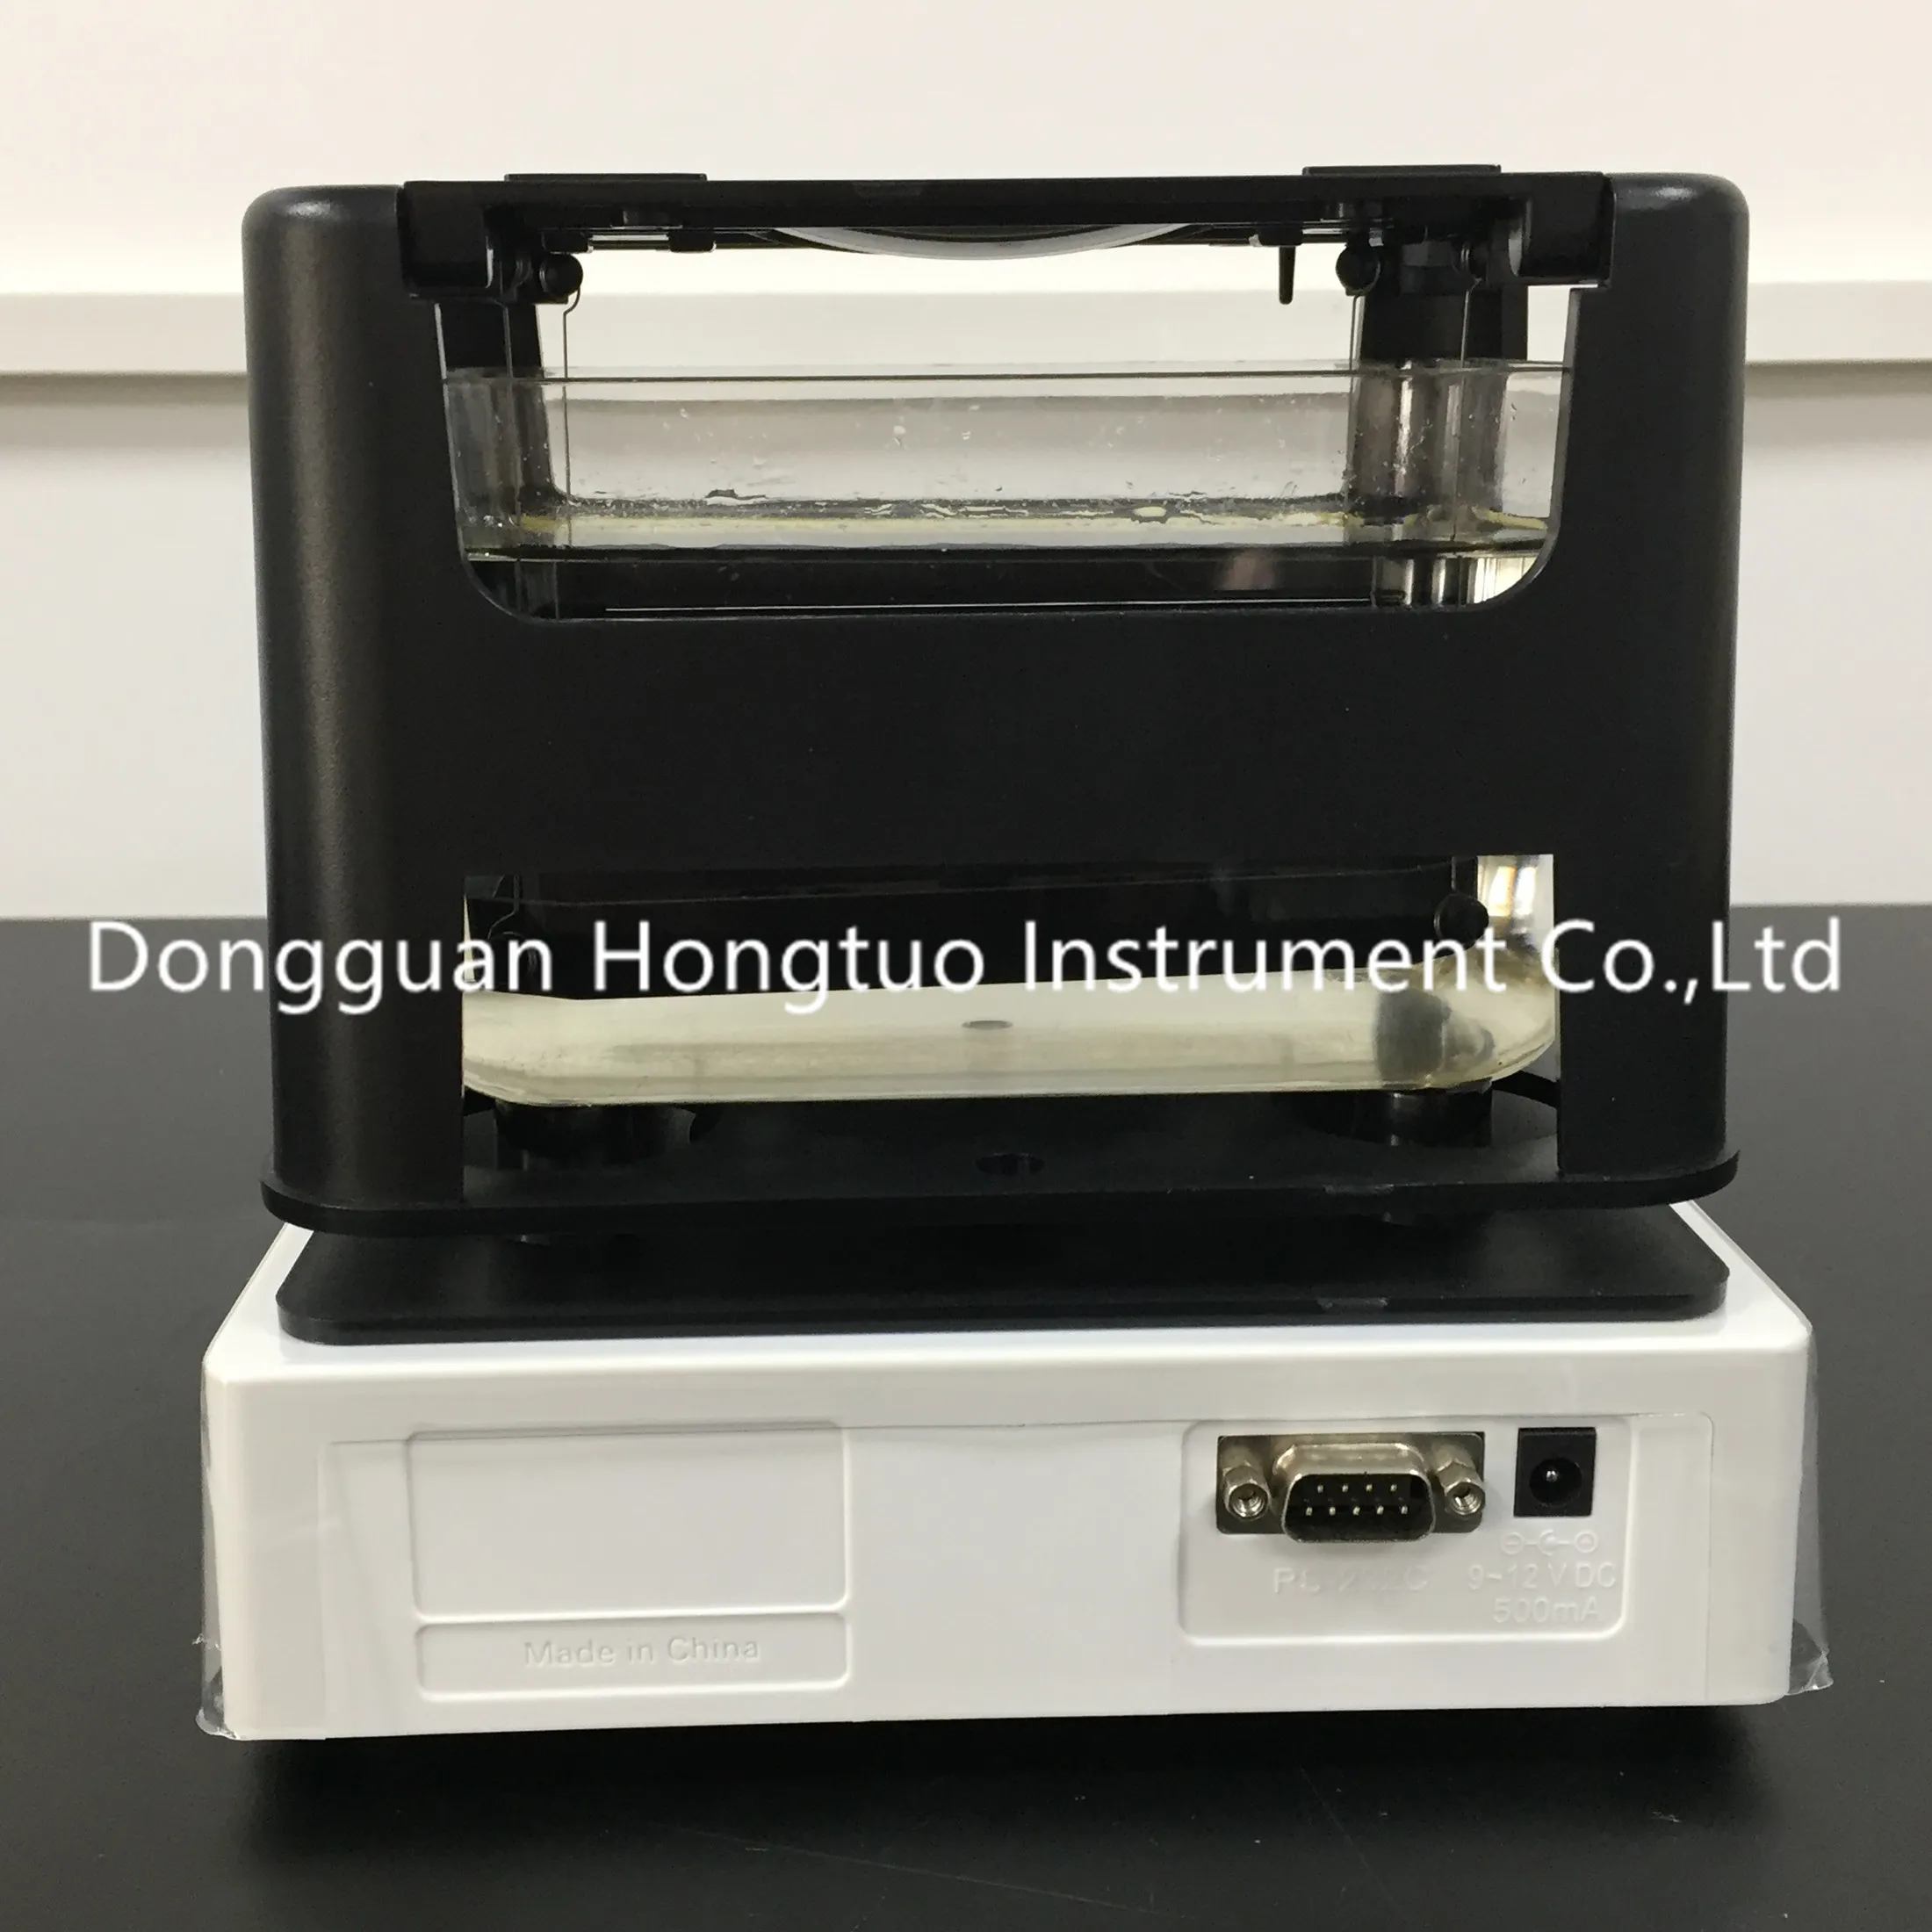 Wholesale AU 1200K Hot Selling Electronic Gold And Silver Tester Price ,  Gold Purity And Karat Tester , Jewellery Gold Tester Equipment,From  Dahometer, $954.77